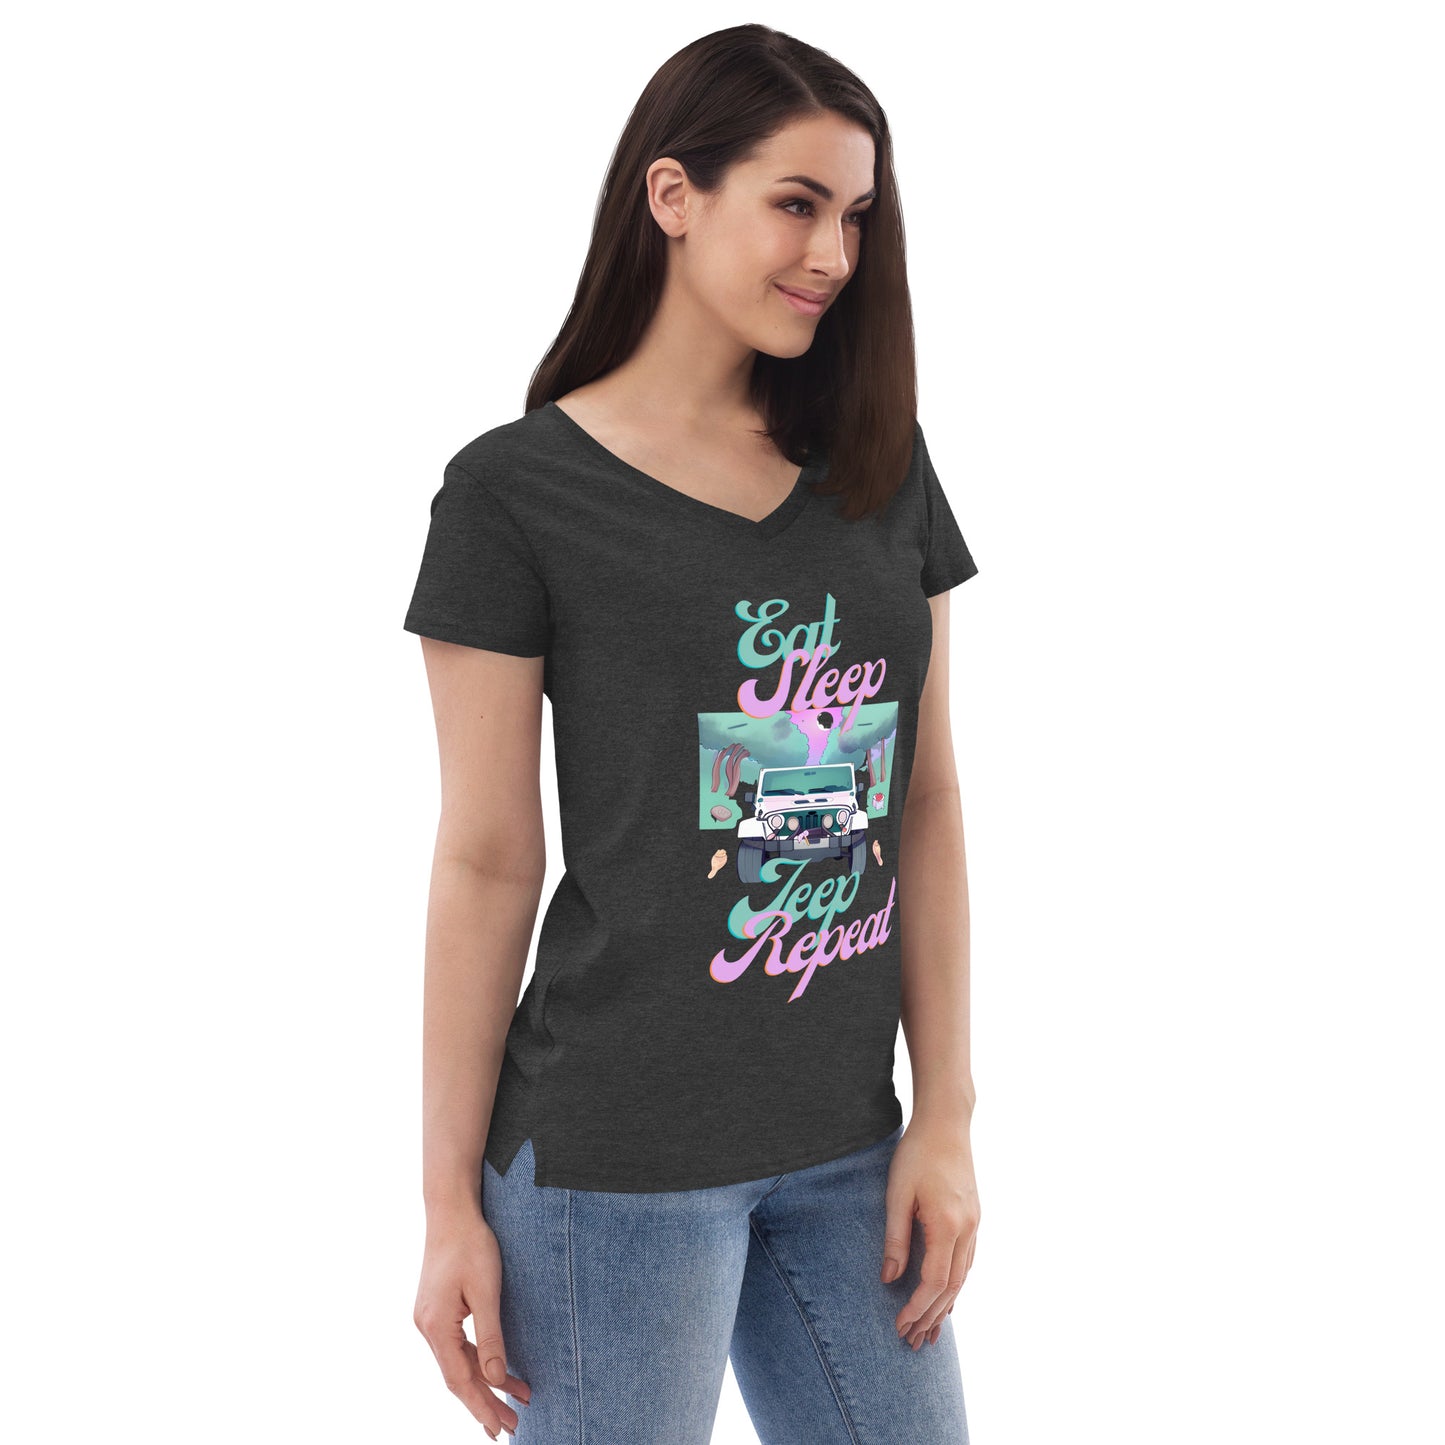 Eat. Sleep. Jeep. Repeat - Women’s recycled v-neck t-shirt